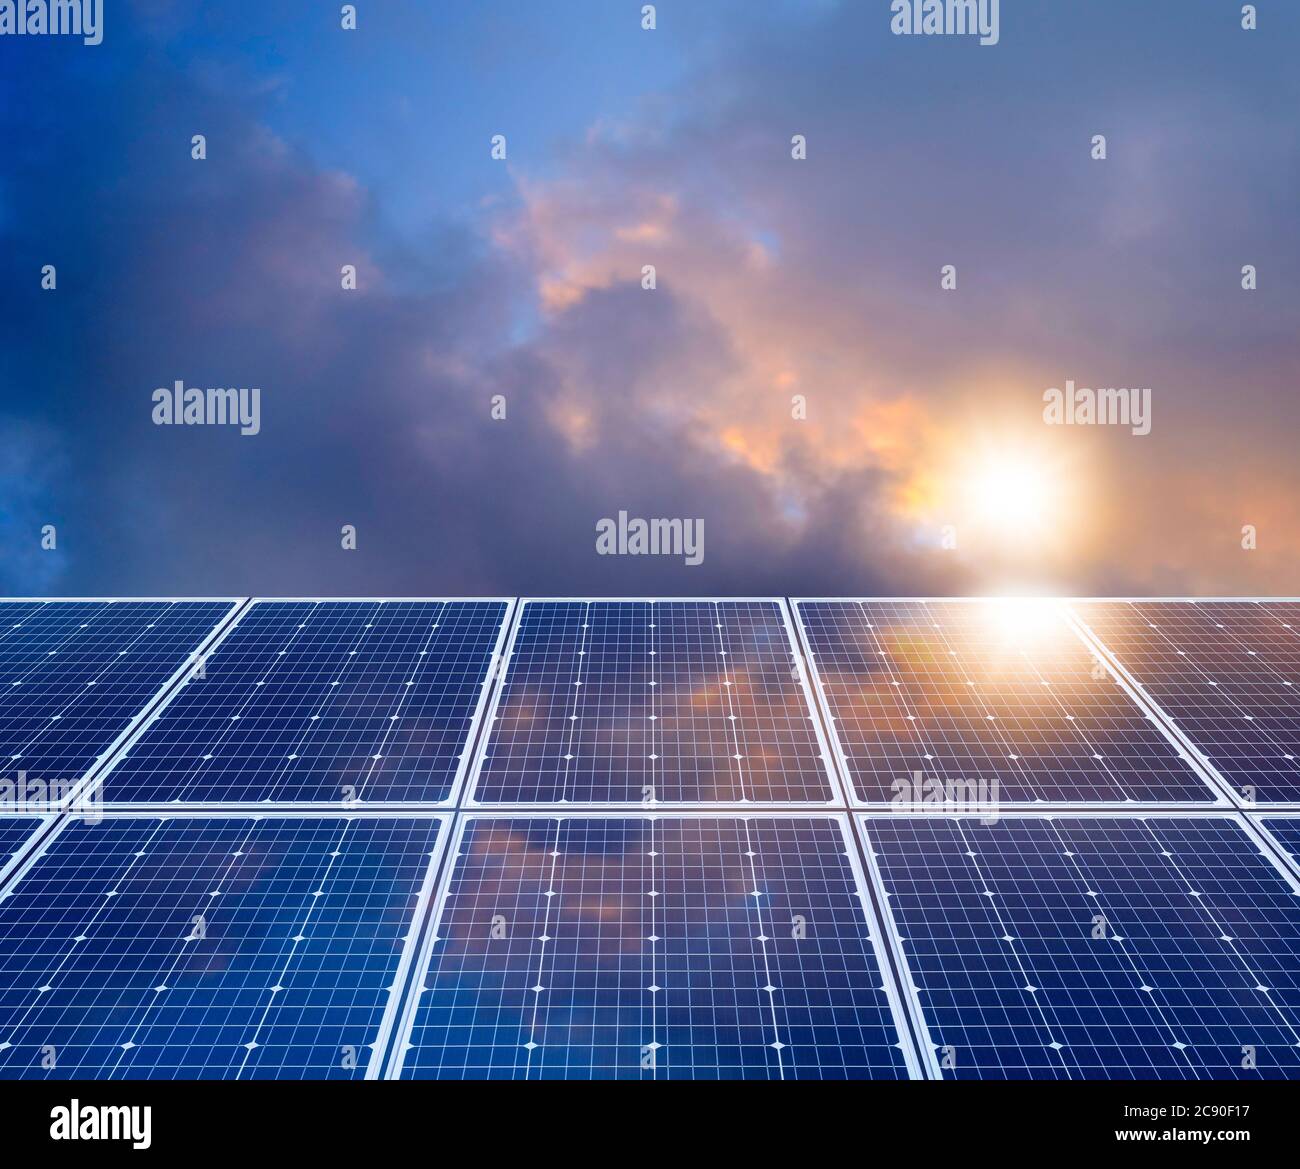 Sun and clouds reflecting in solar panel Stock Photo